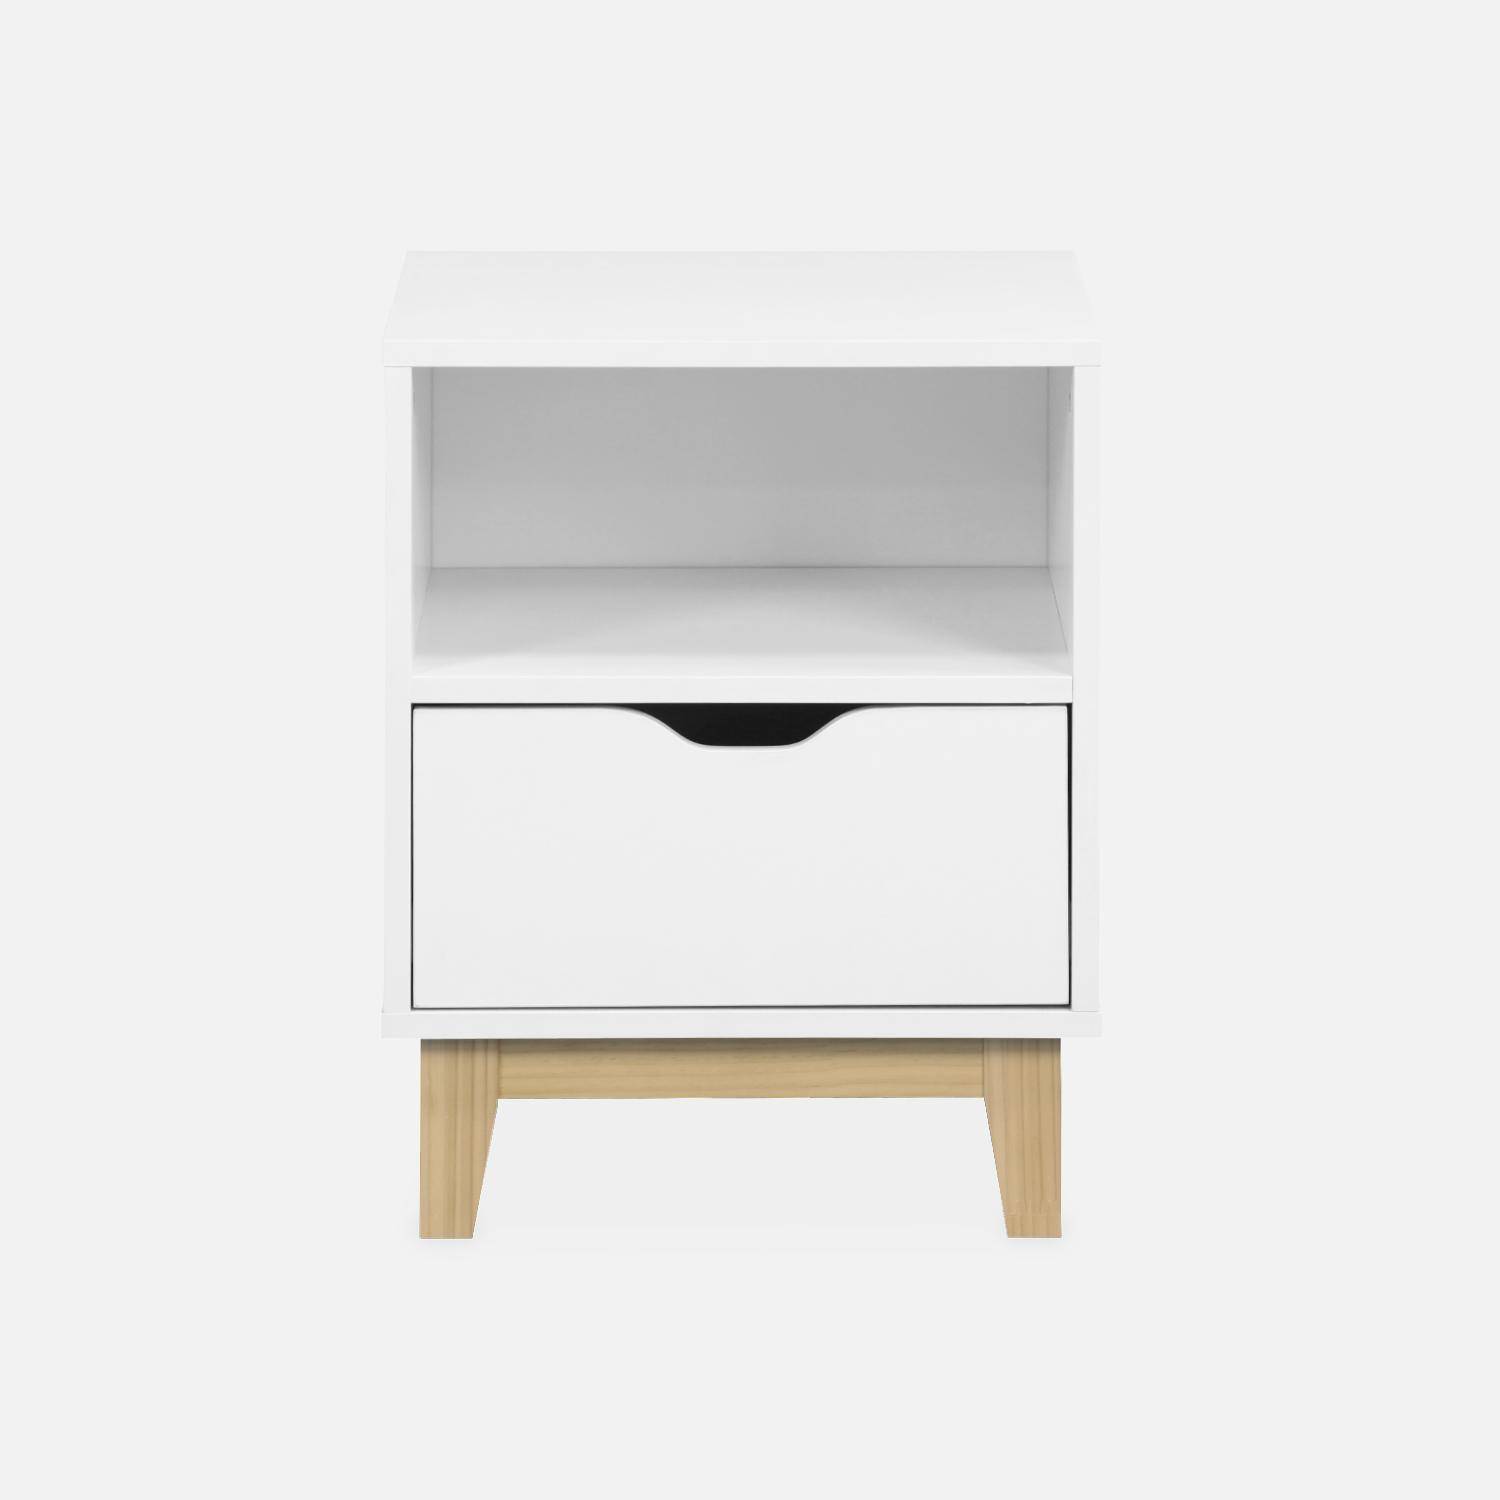 White bedside table with fir wood legs - Floki - 40 x 39 x 52cm - 1 drawer and 1 niche Photo5